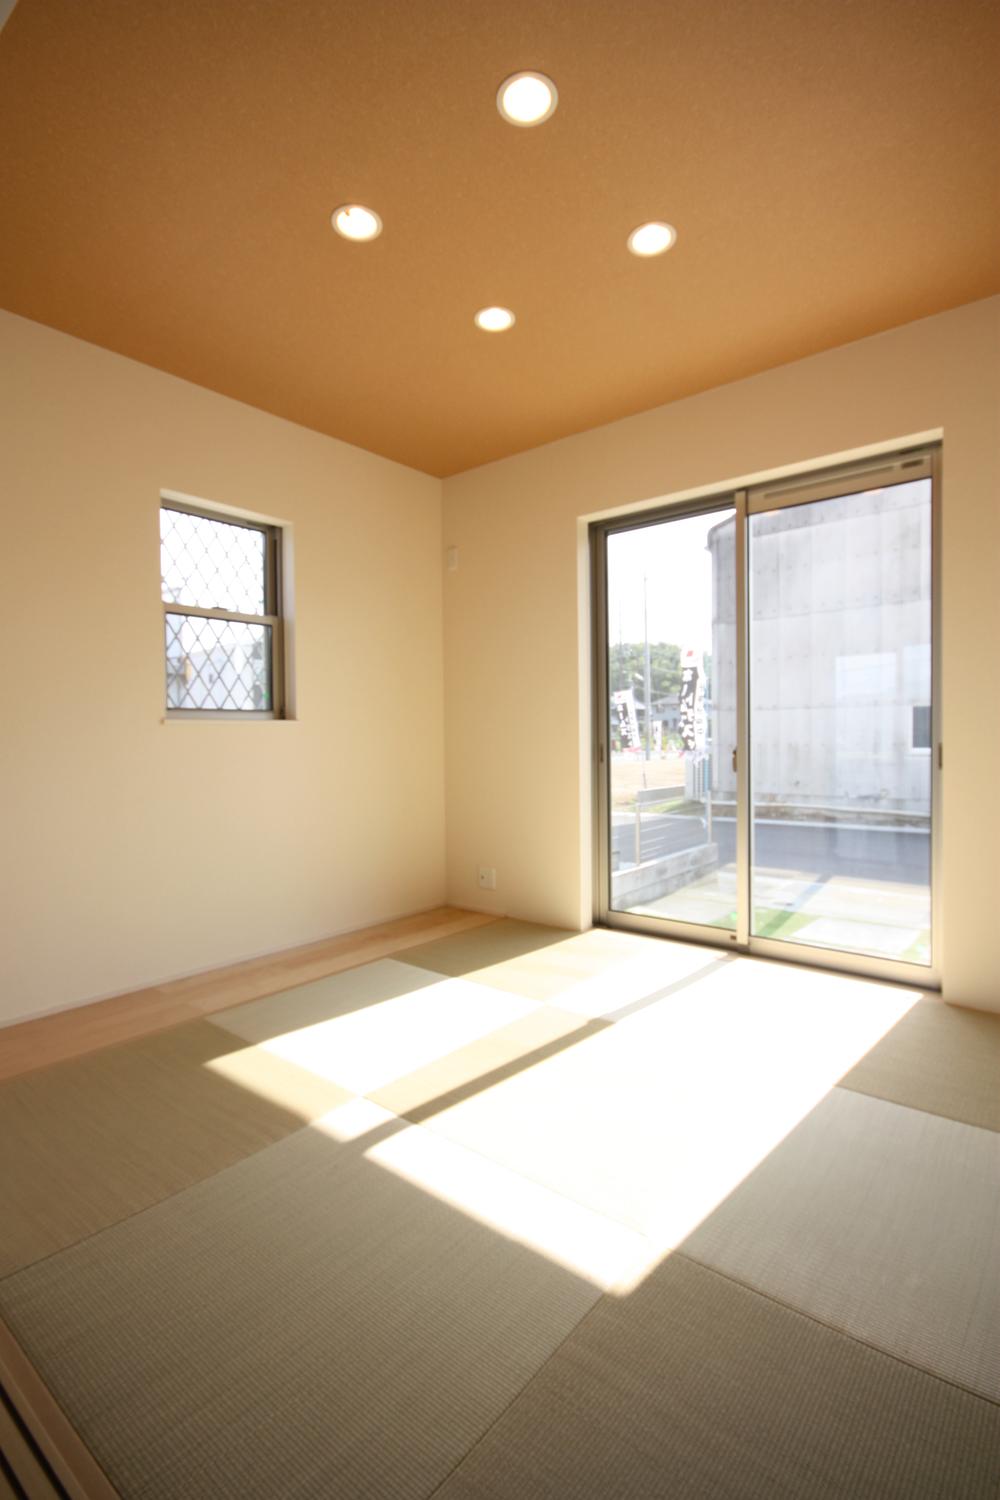 Building plan example (introspection photo). Japanese-style room, which is very useful unchanged from a long time ago. It can also correspond to the sudden visitor. 